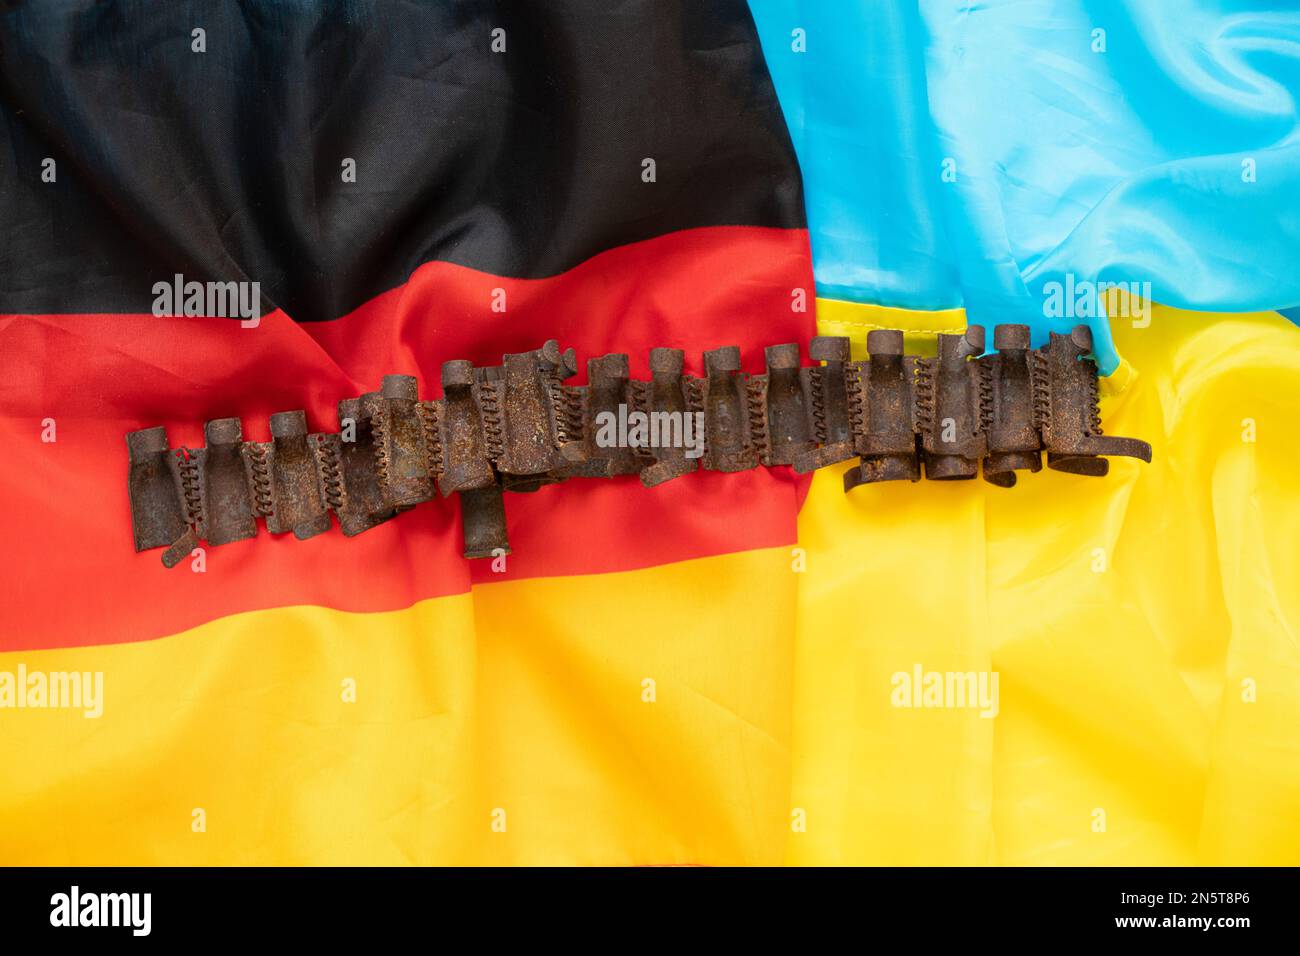 A torn Russian cartridge belt lies on two flags of Ukraine and Germany, ammunition and war Stock Photo